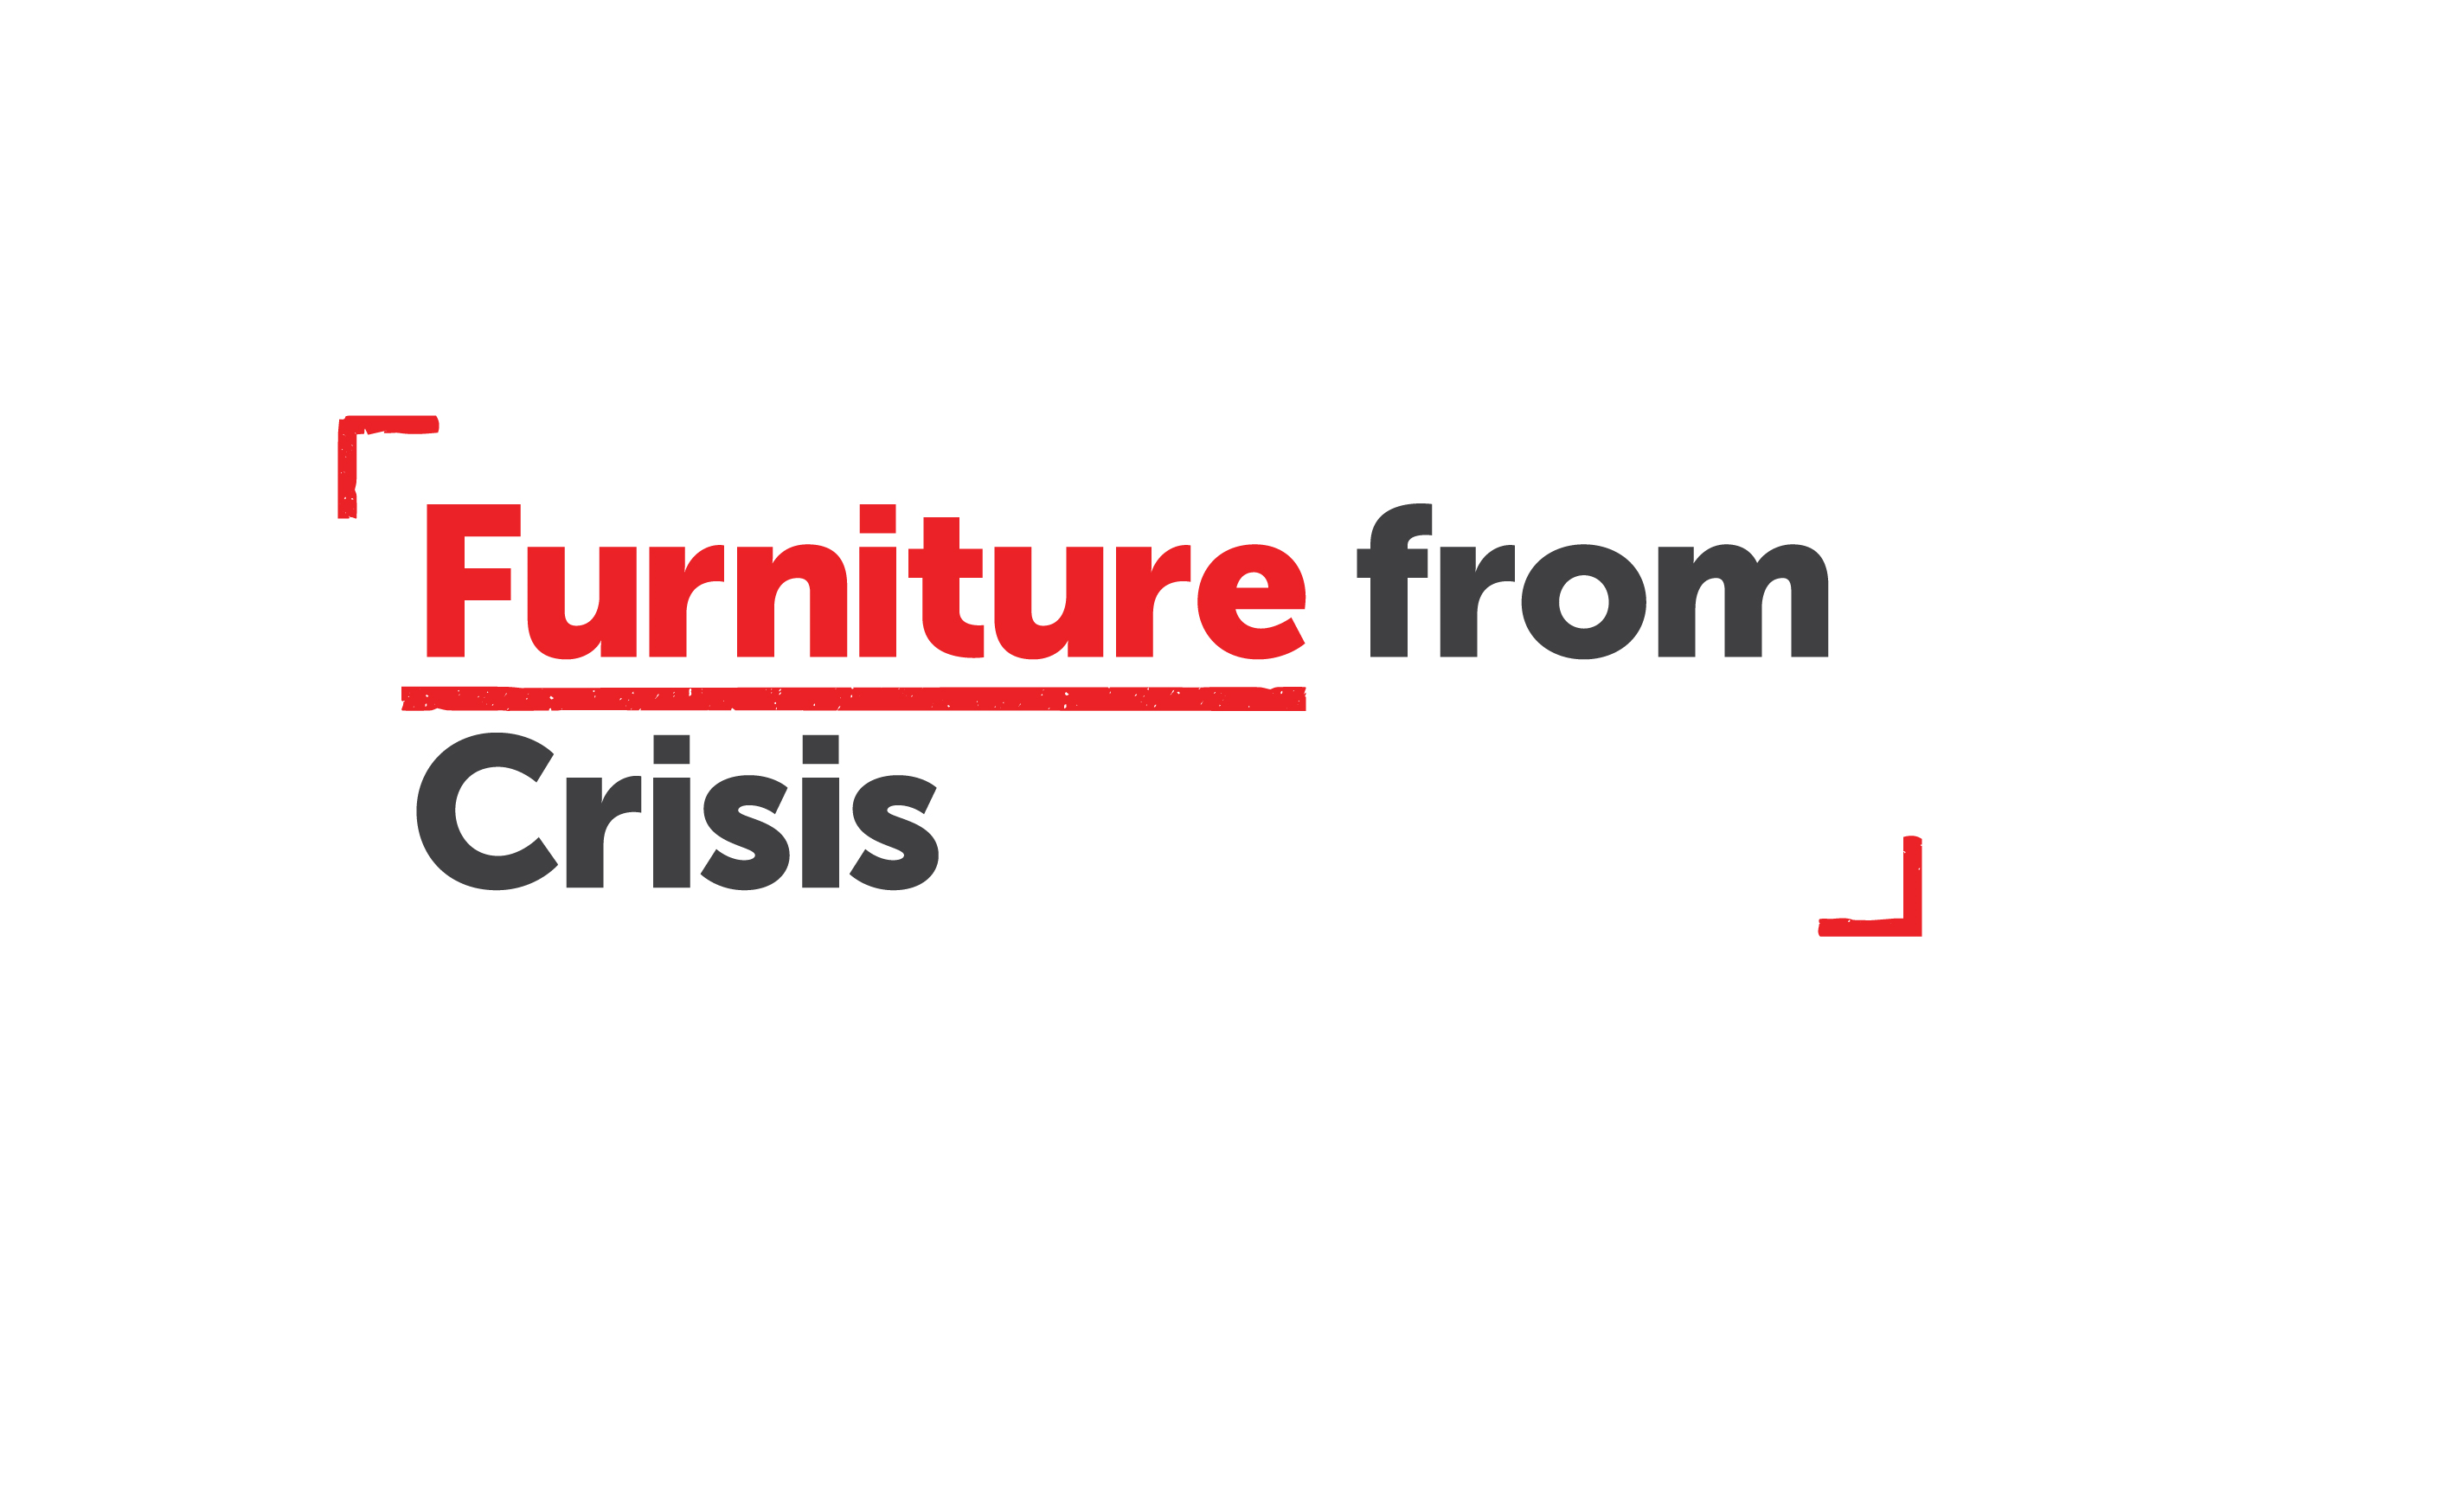 Furniture from Crisis